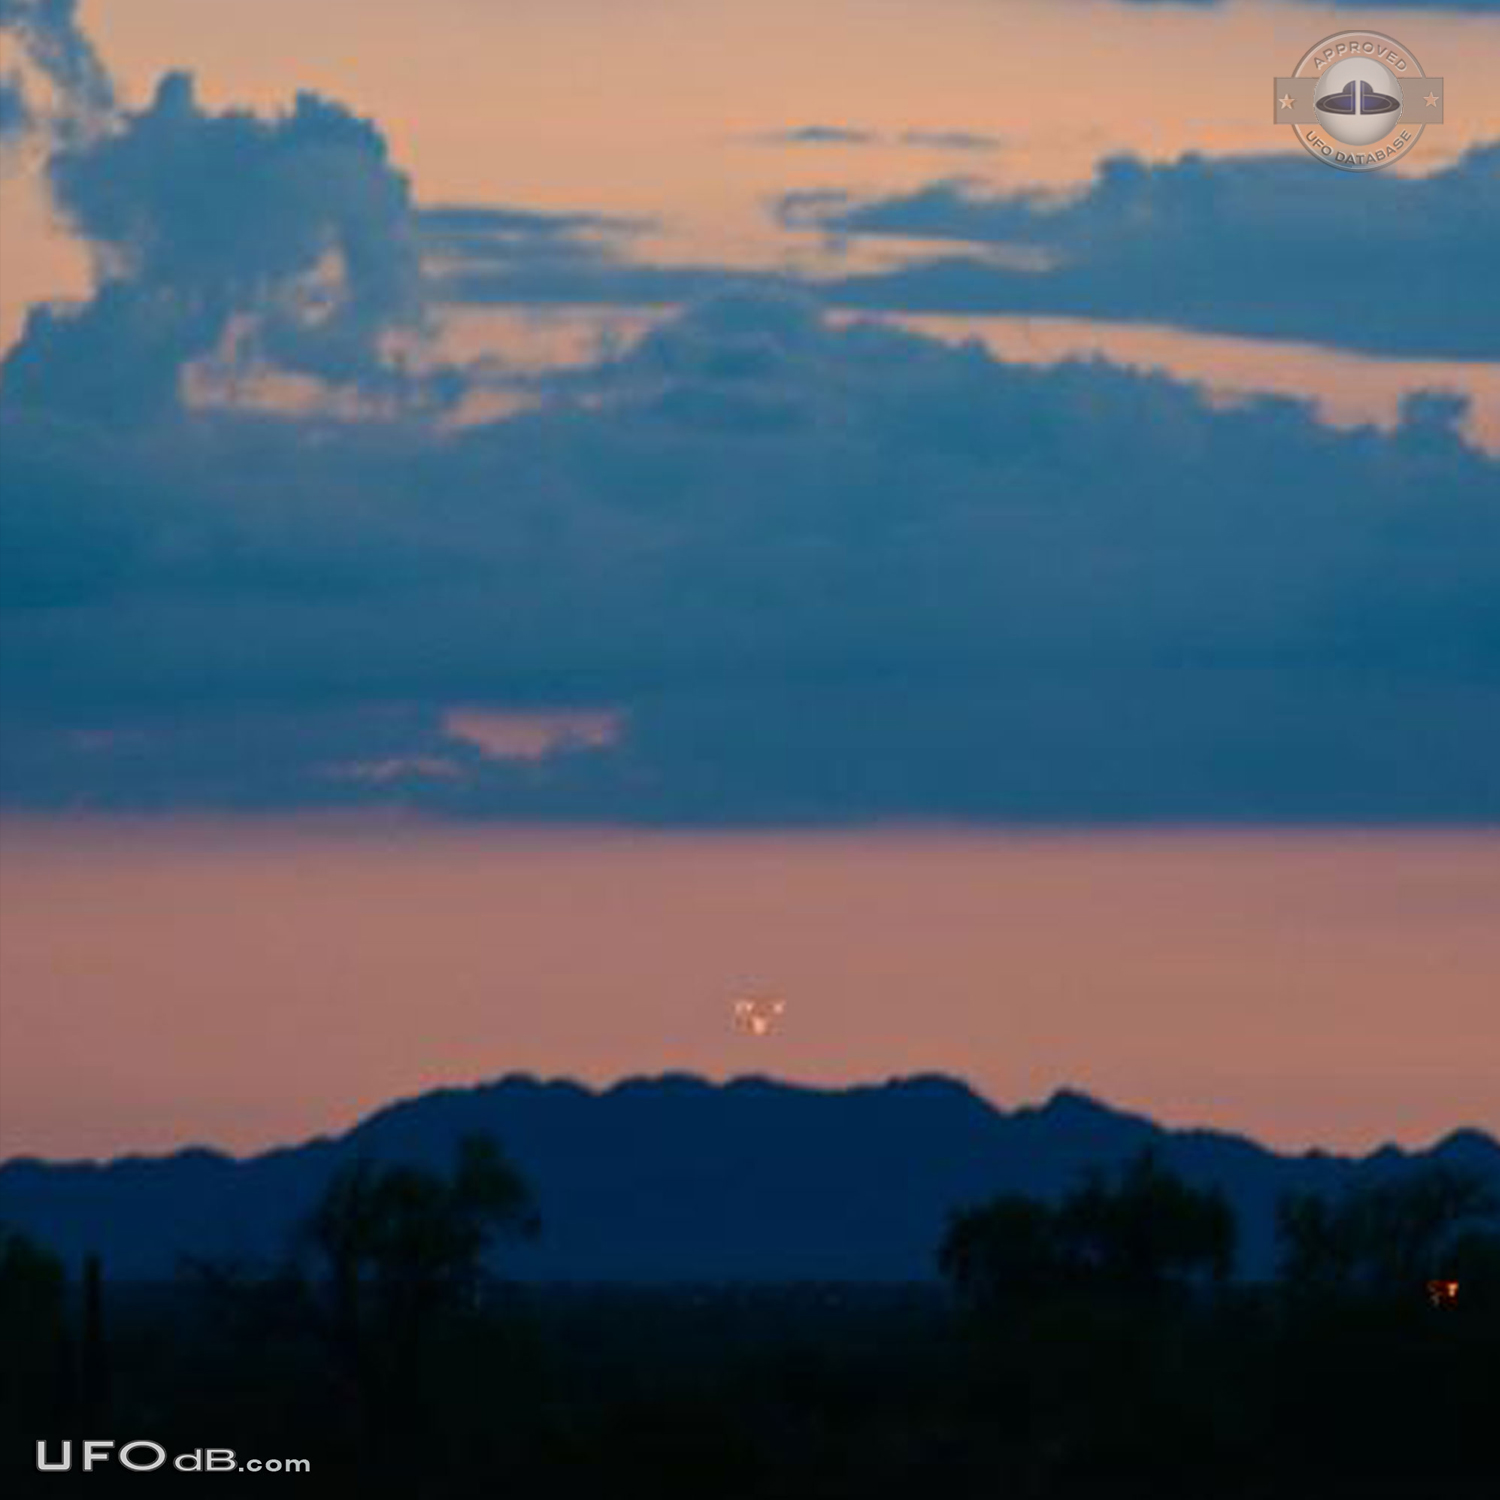 Famous UFO photos in the News - Fleet of UFOs Gila Bend, Arizona 2012 UFO Picture #534-1